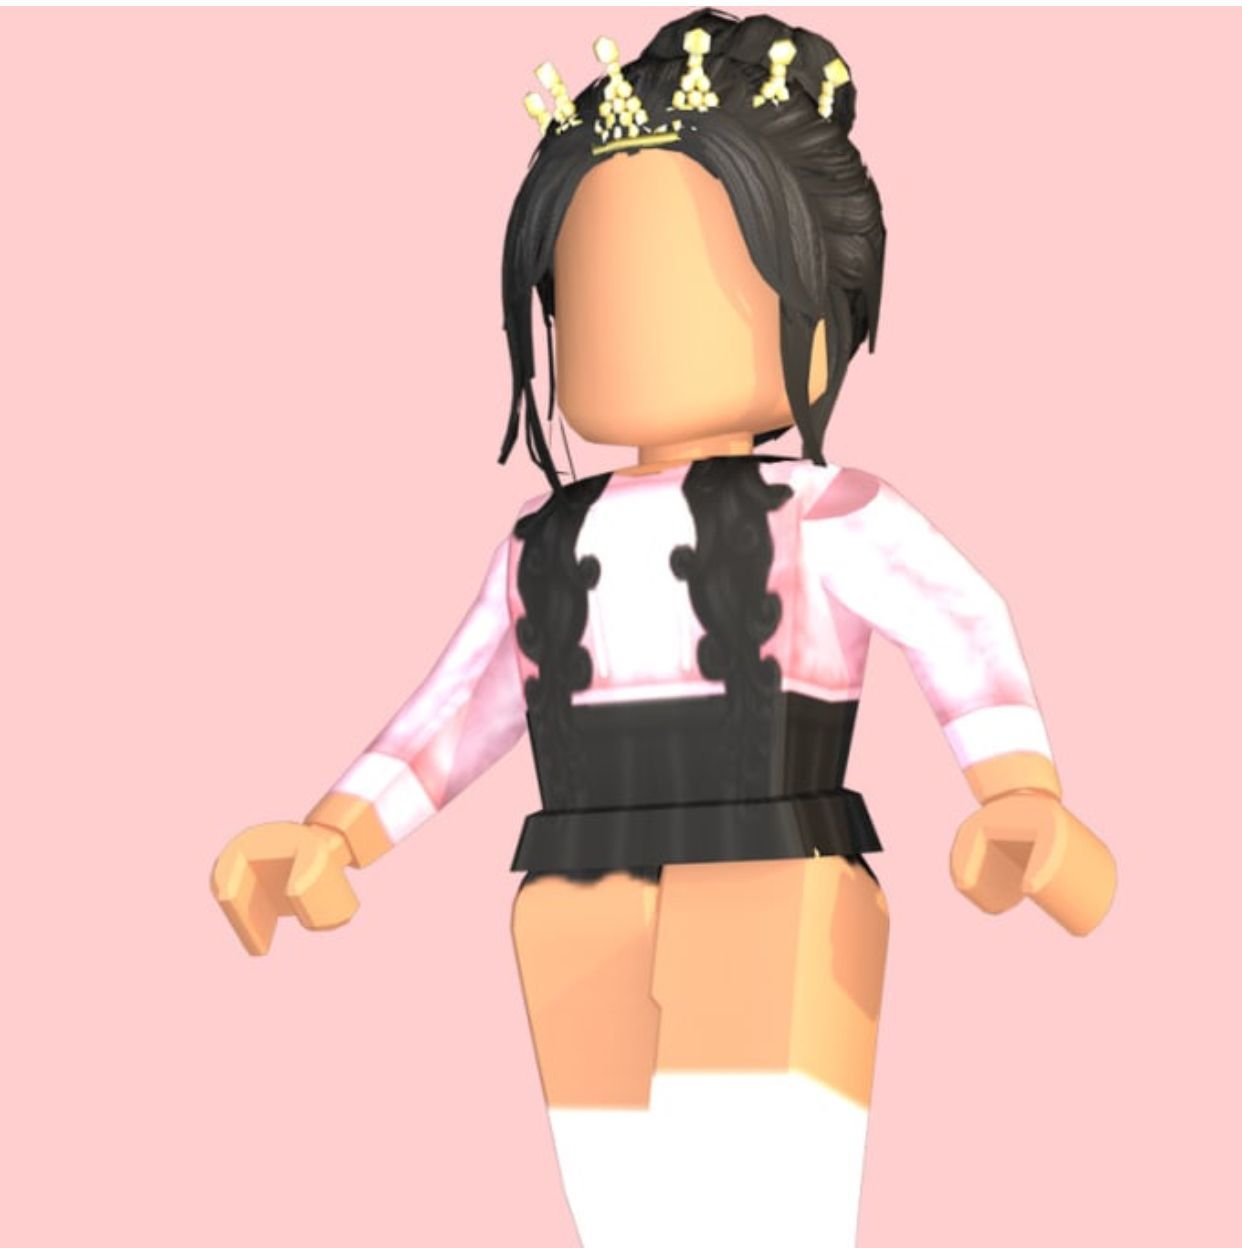 Pretty Peach Aesthetic Aesthetic Roblox Characters Girl